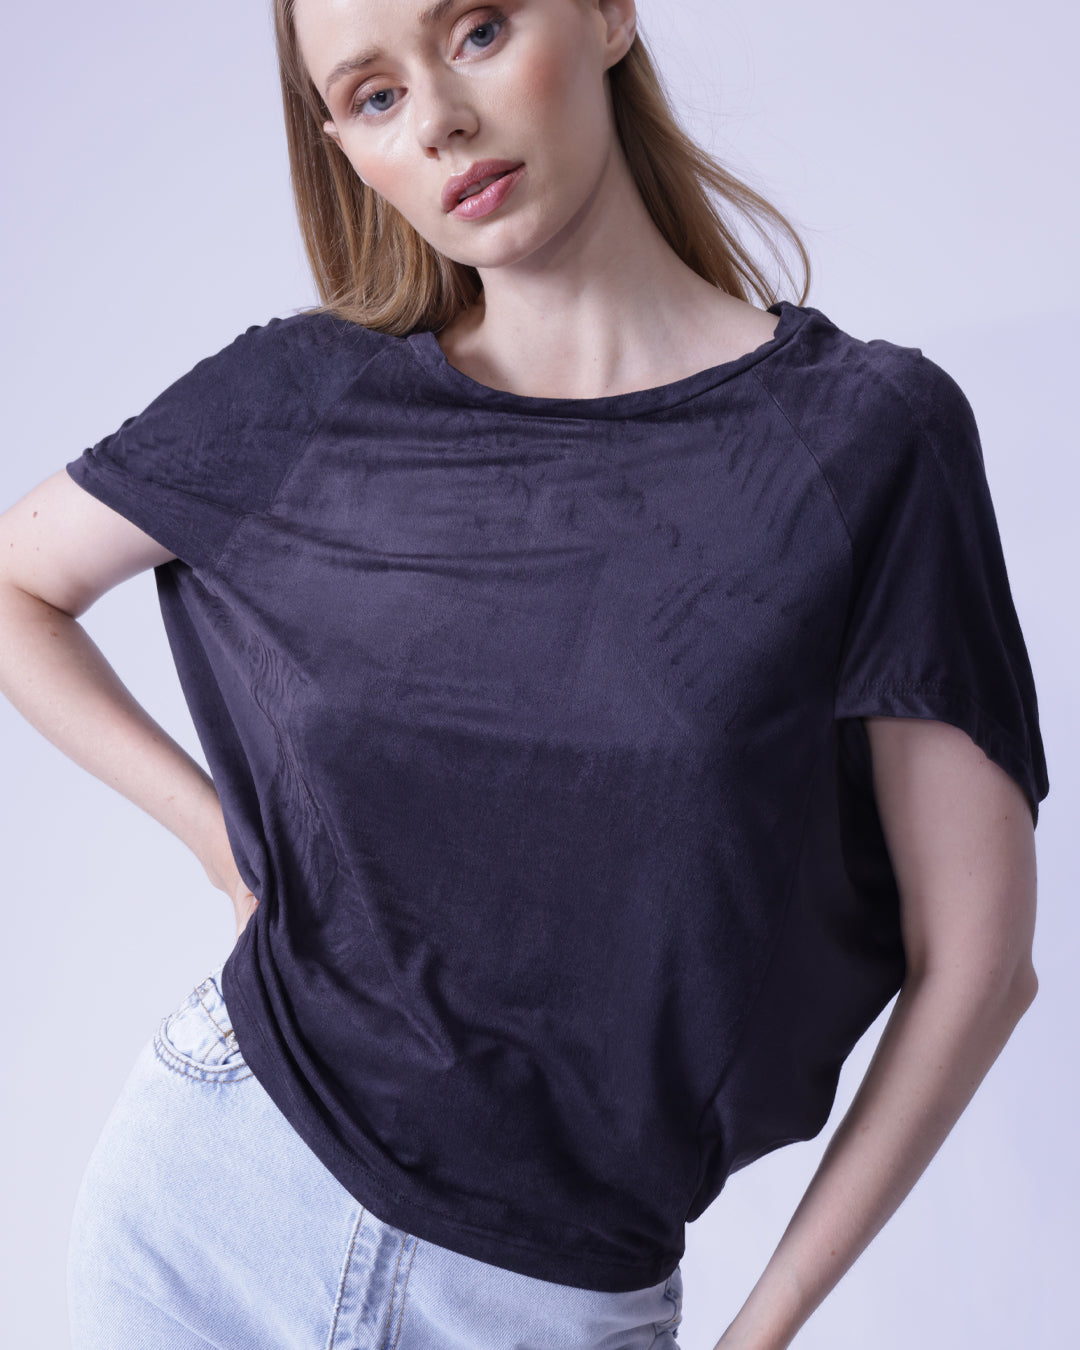 Suede-like Super Soft and Elegant Batwing Sleeve T-Shirt